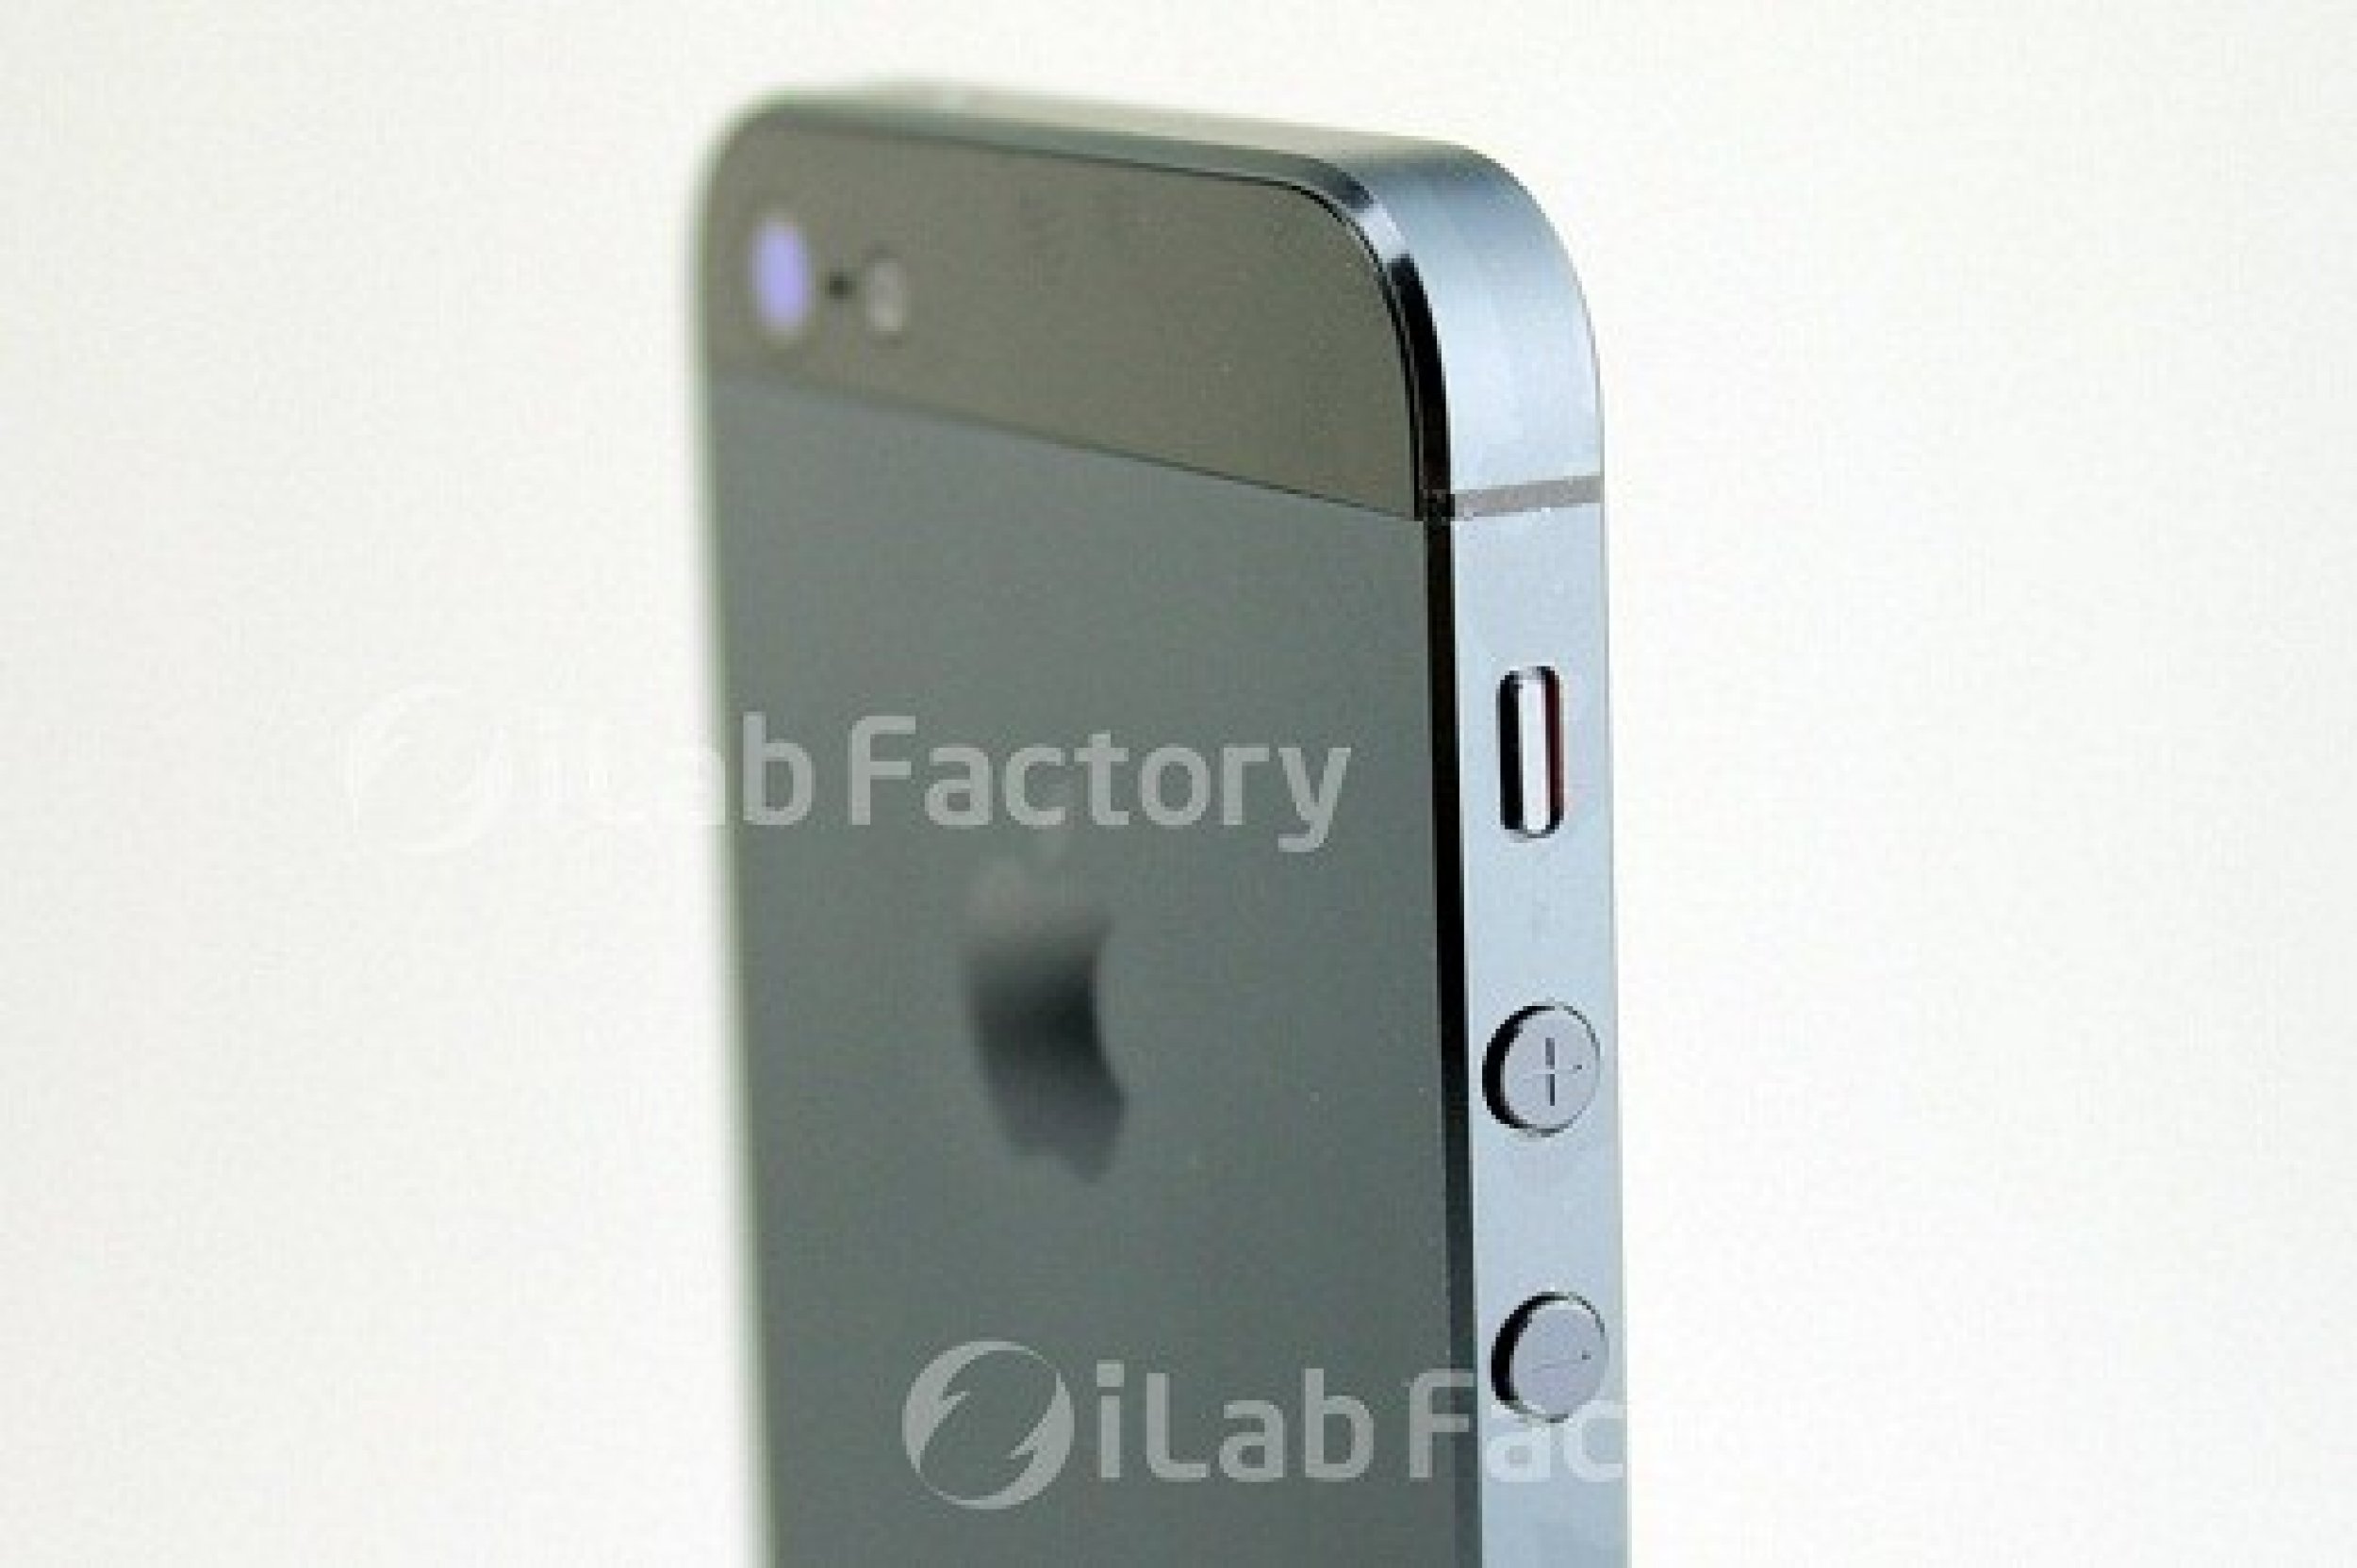 Apple iPhone 5 Features Why Future iOS Devices Need The 19-Pin Dock Connector